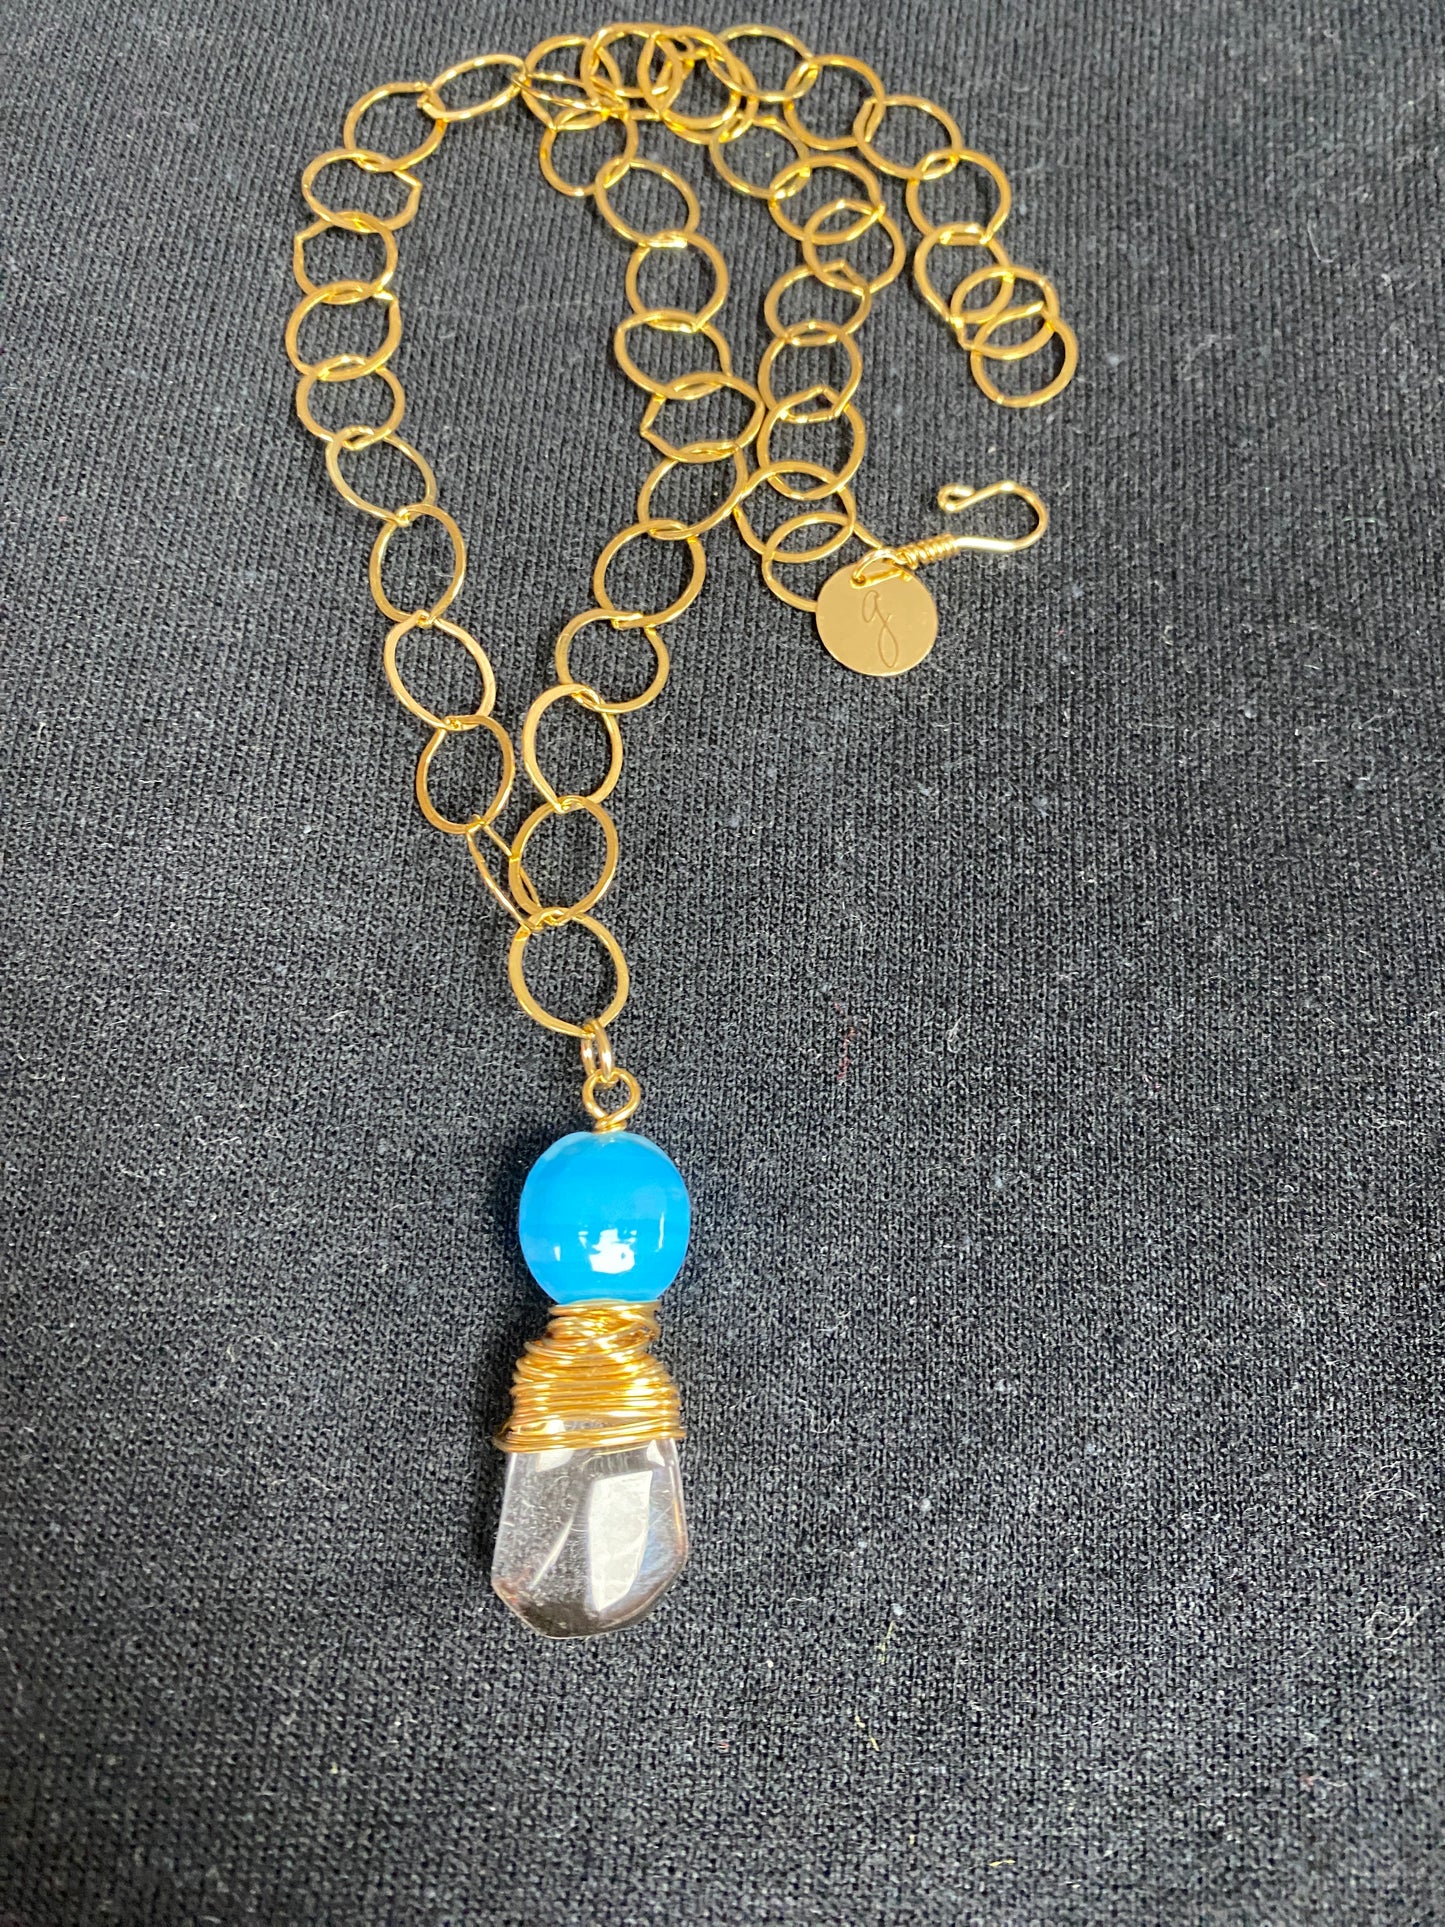 Gold Filled Link With Glass Drop and Gold Filled Wire Wrapped Necklace